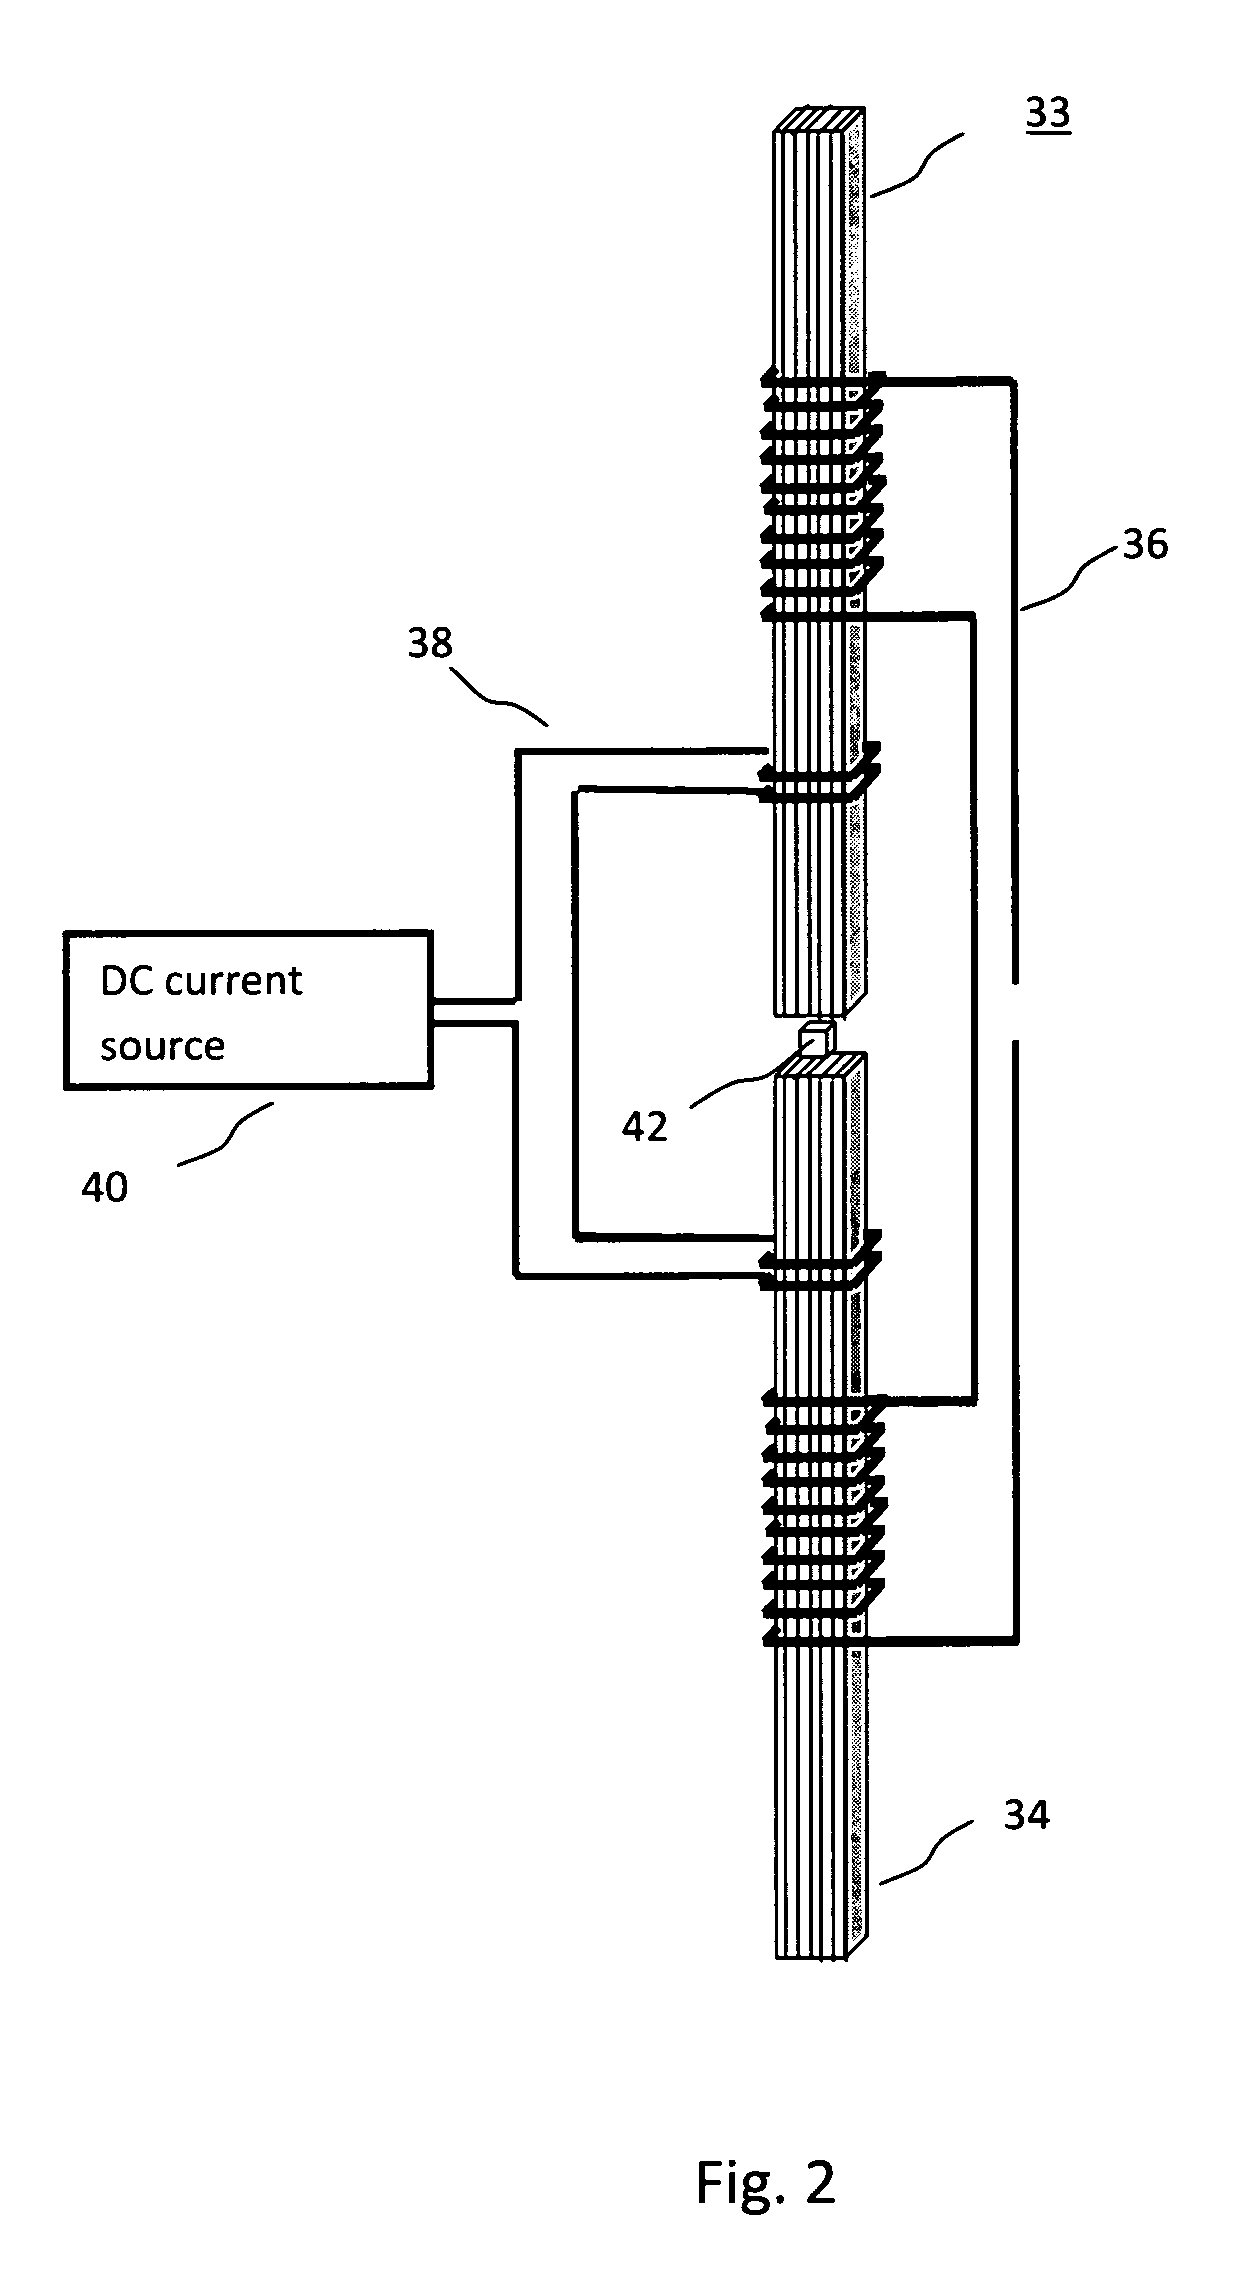 Magnetic sensing assembly for measuring time varying magnetic fields of geological formations